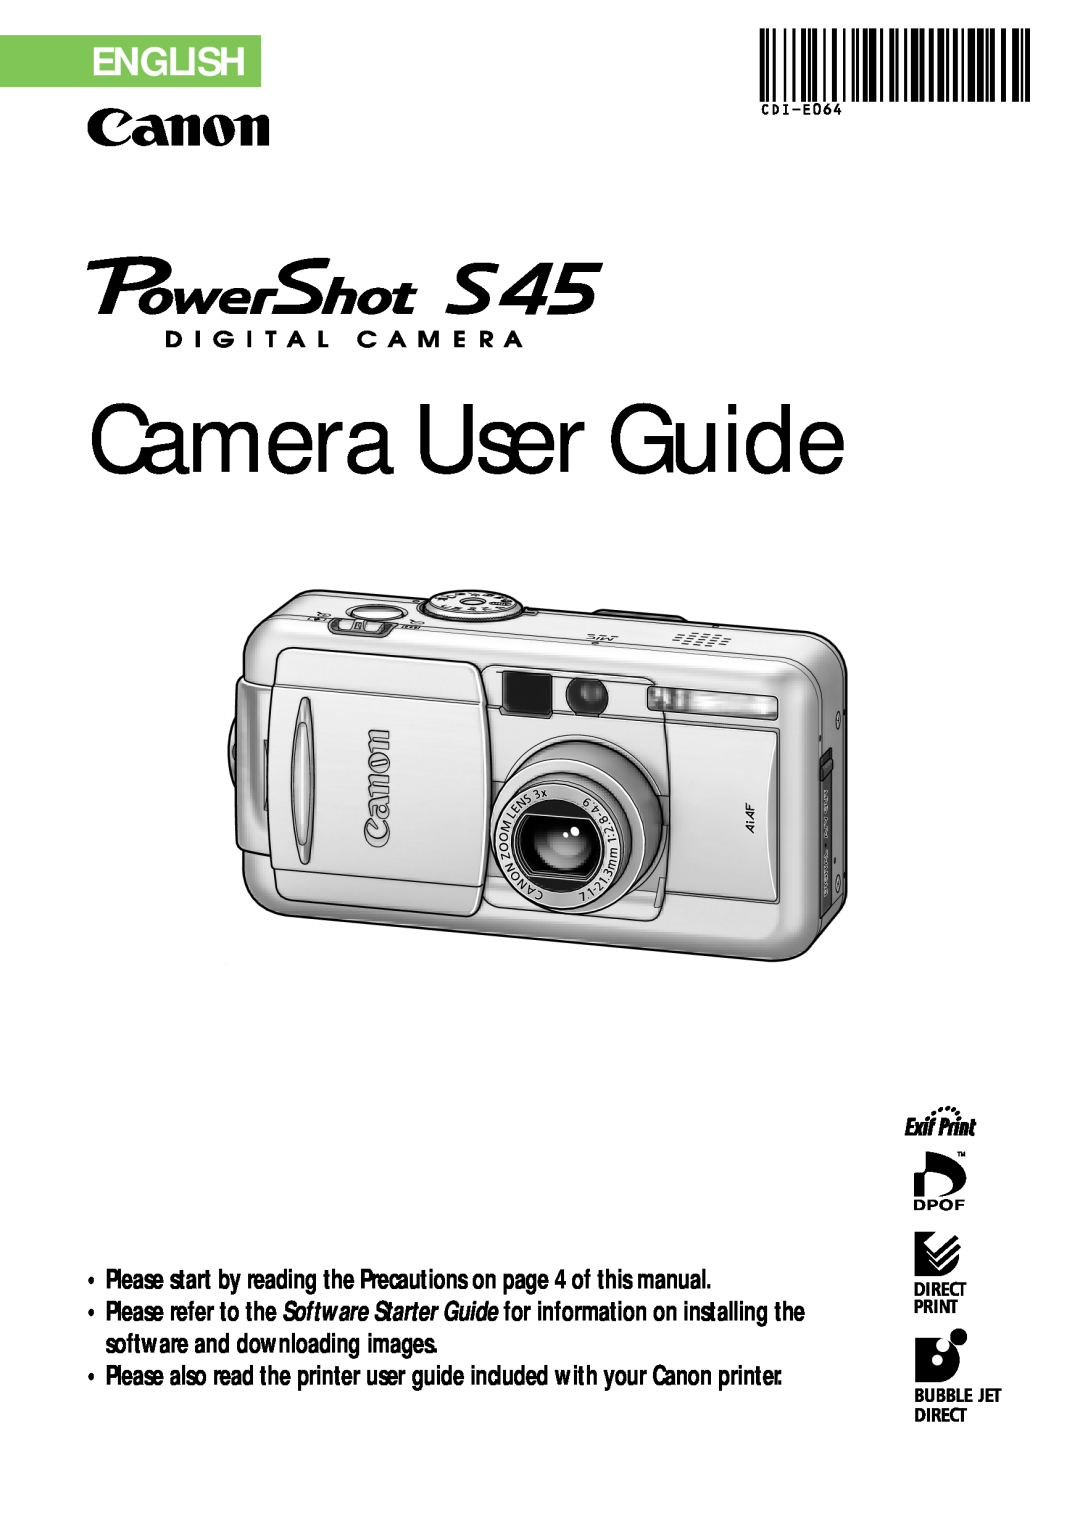 Canon PowerShot S45 manual English, Please start by reading the Precautions on page 4 of this manual, Camera User Guide 